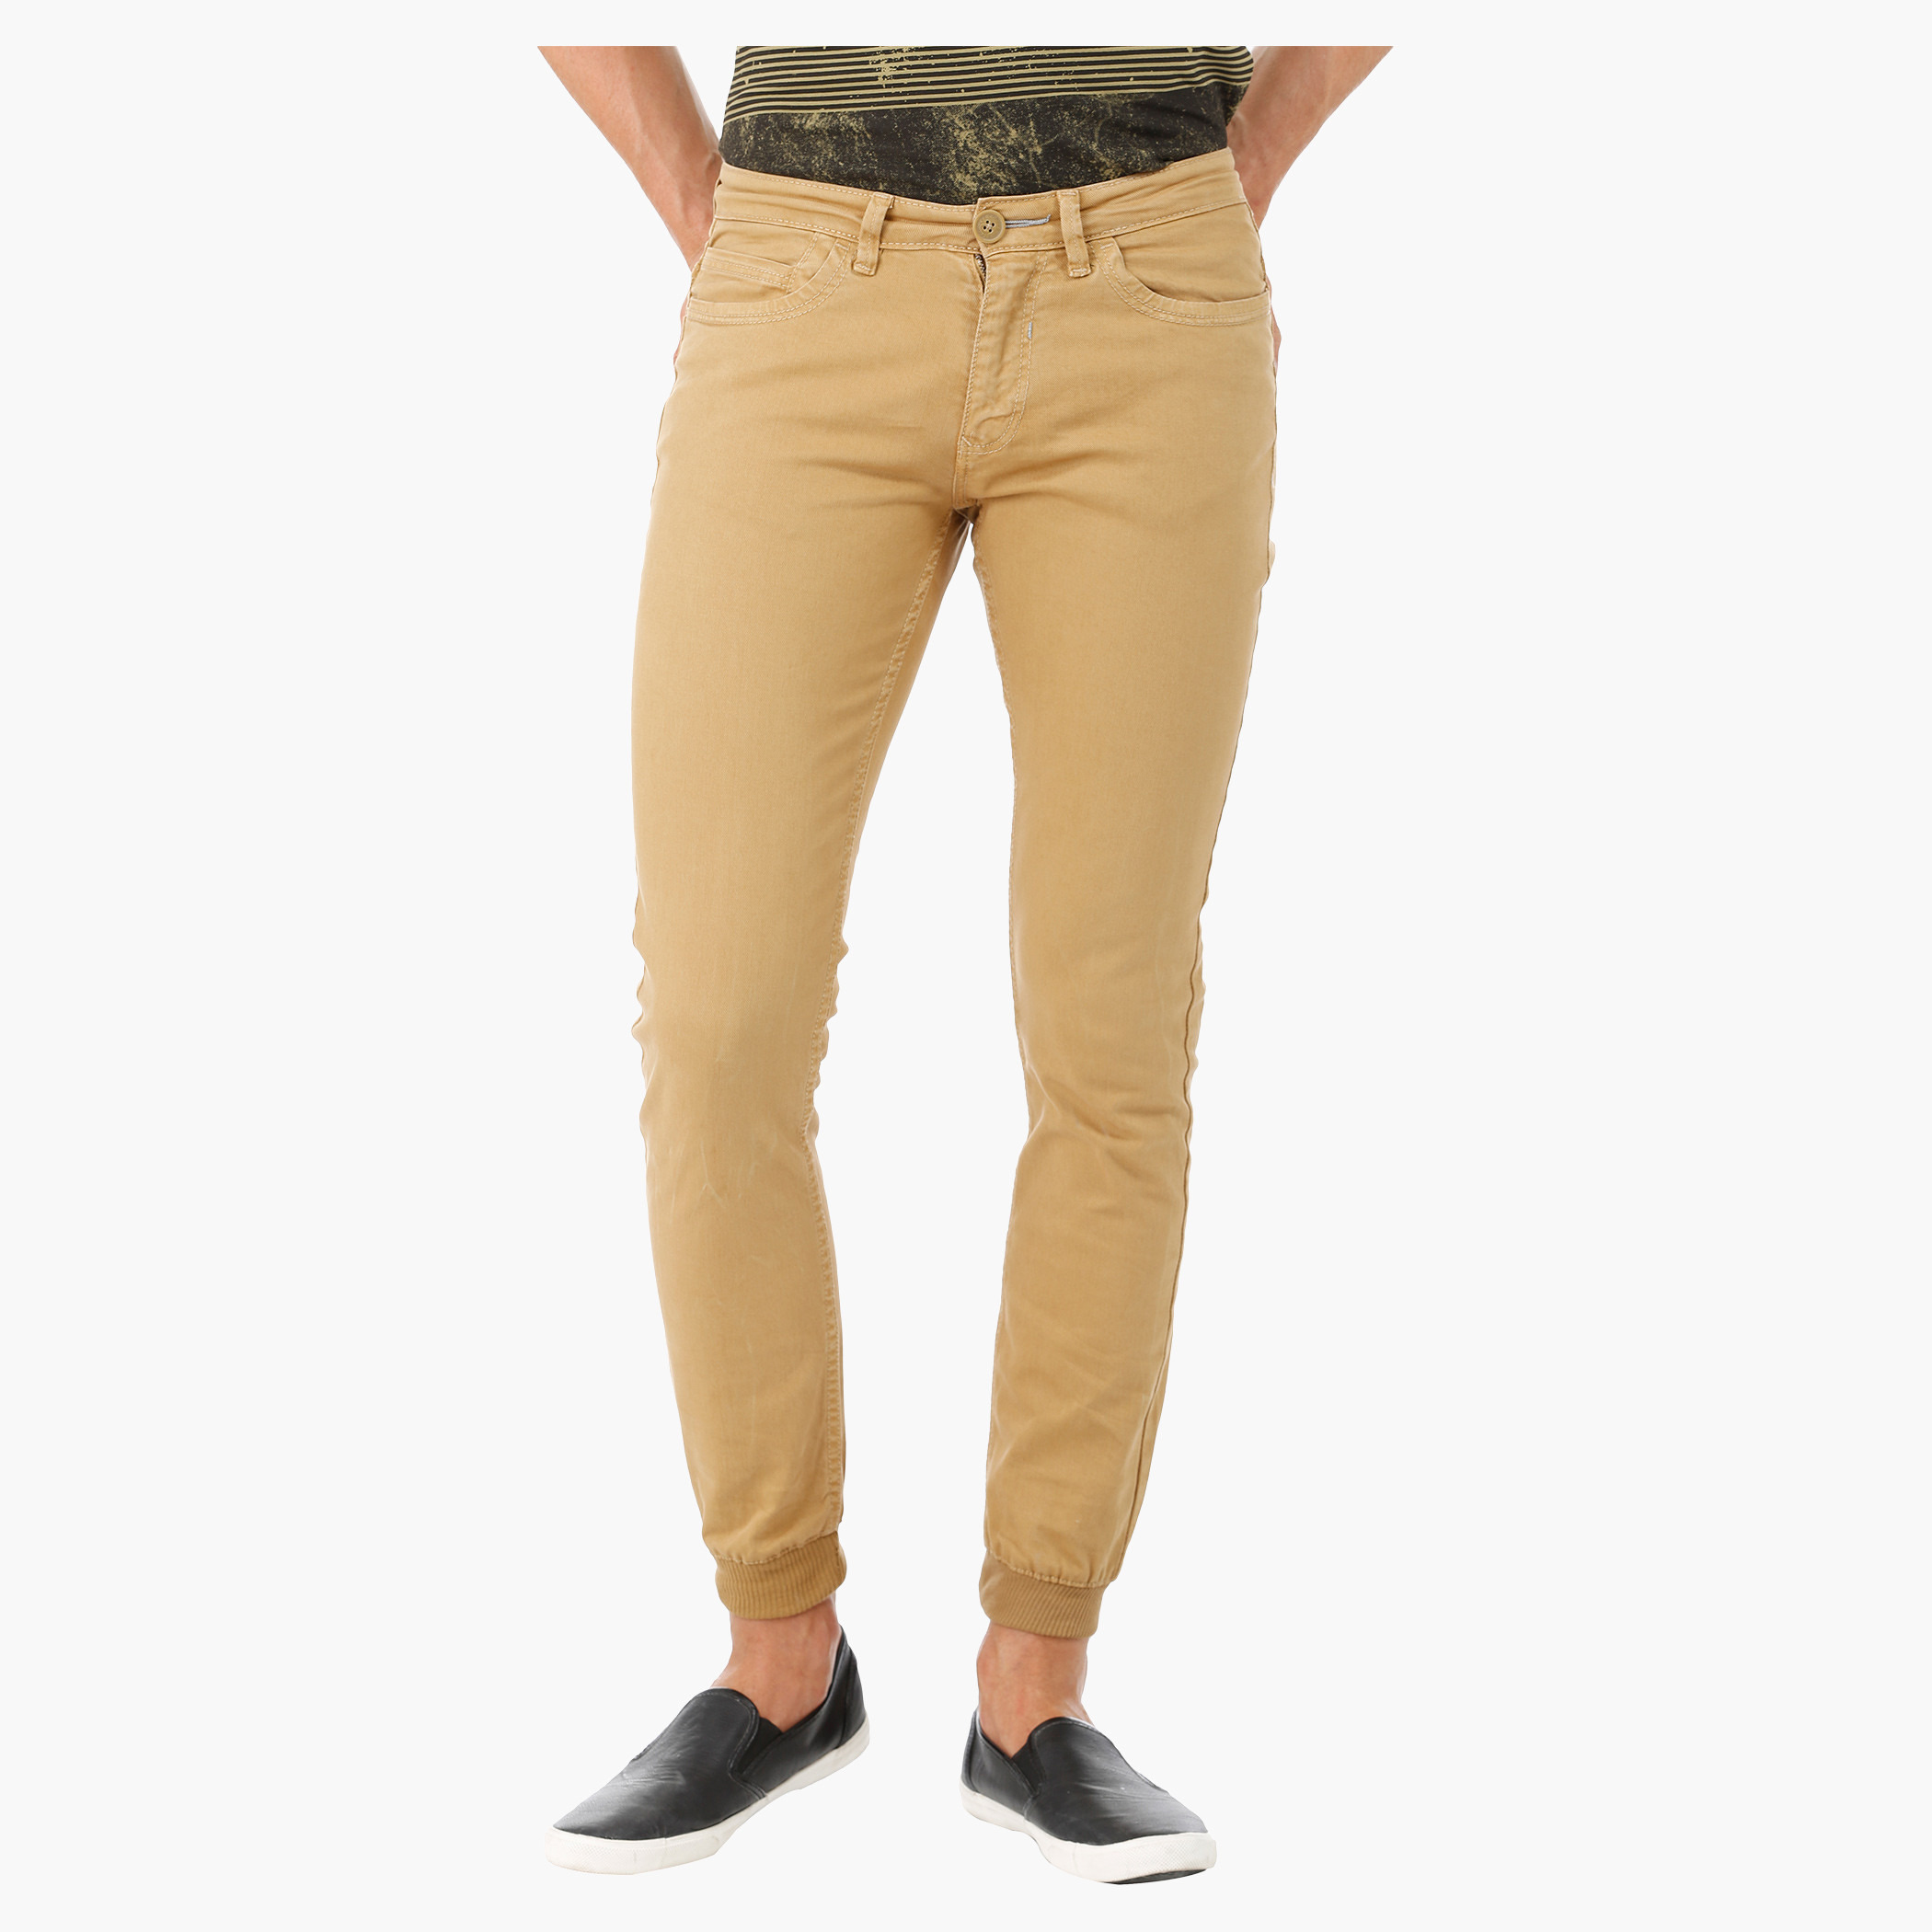 Buy Lee Cooper Men's Chino Casual Trousers (1002390599006_Blue_38W x 34L)  at Amazon.in